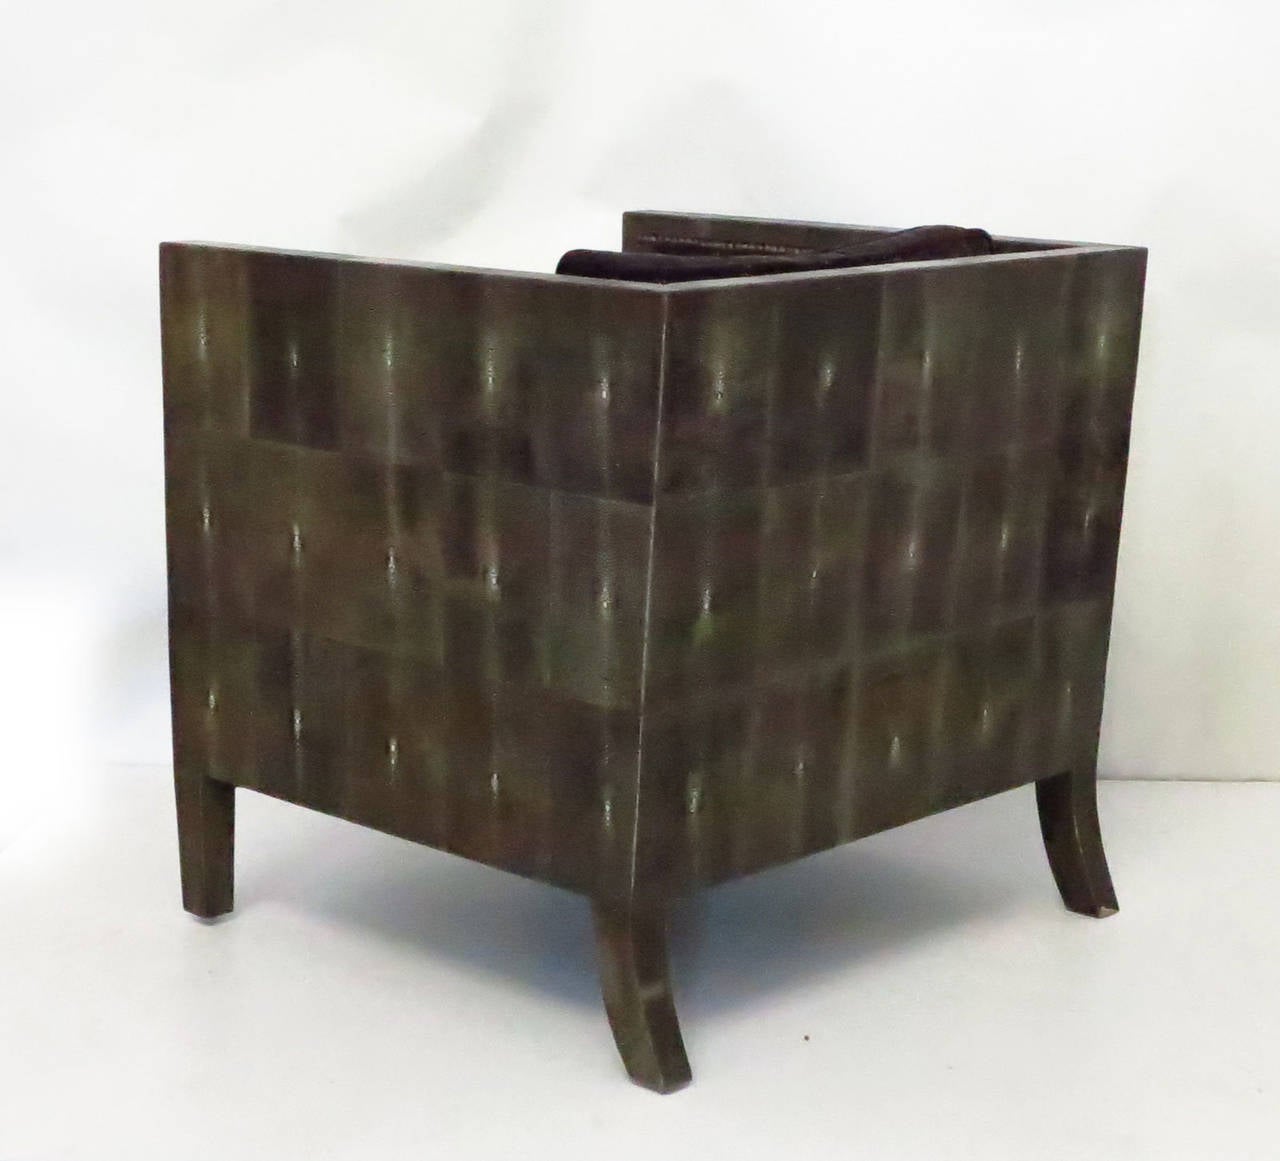 High quality shagreen cube chair after a design by Jean-Michel Frank.